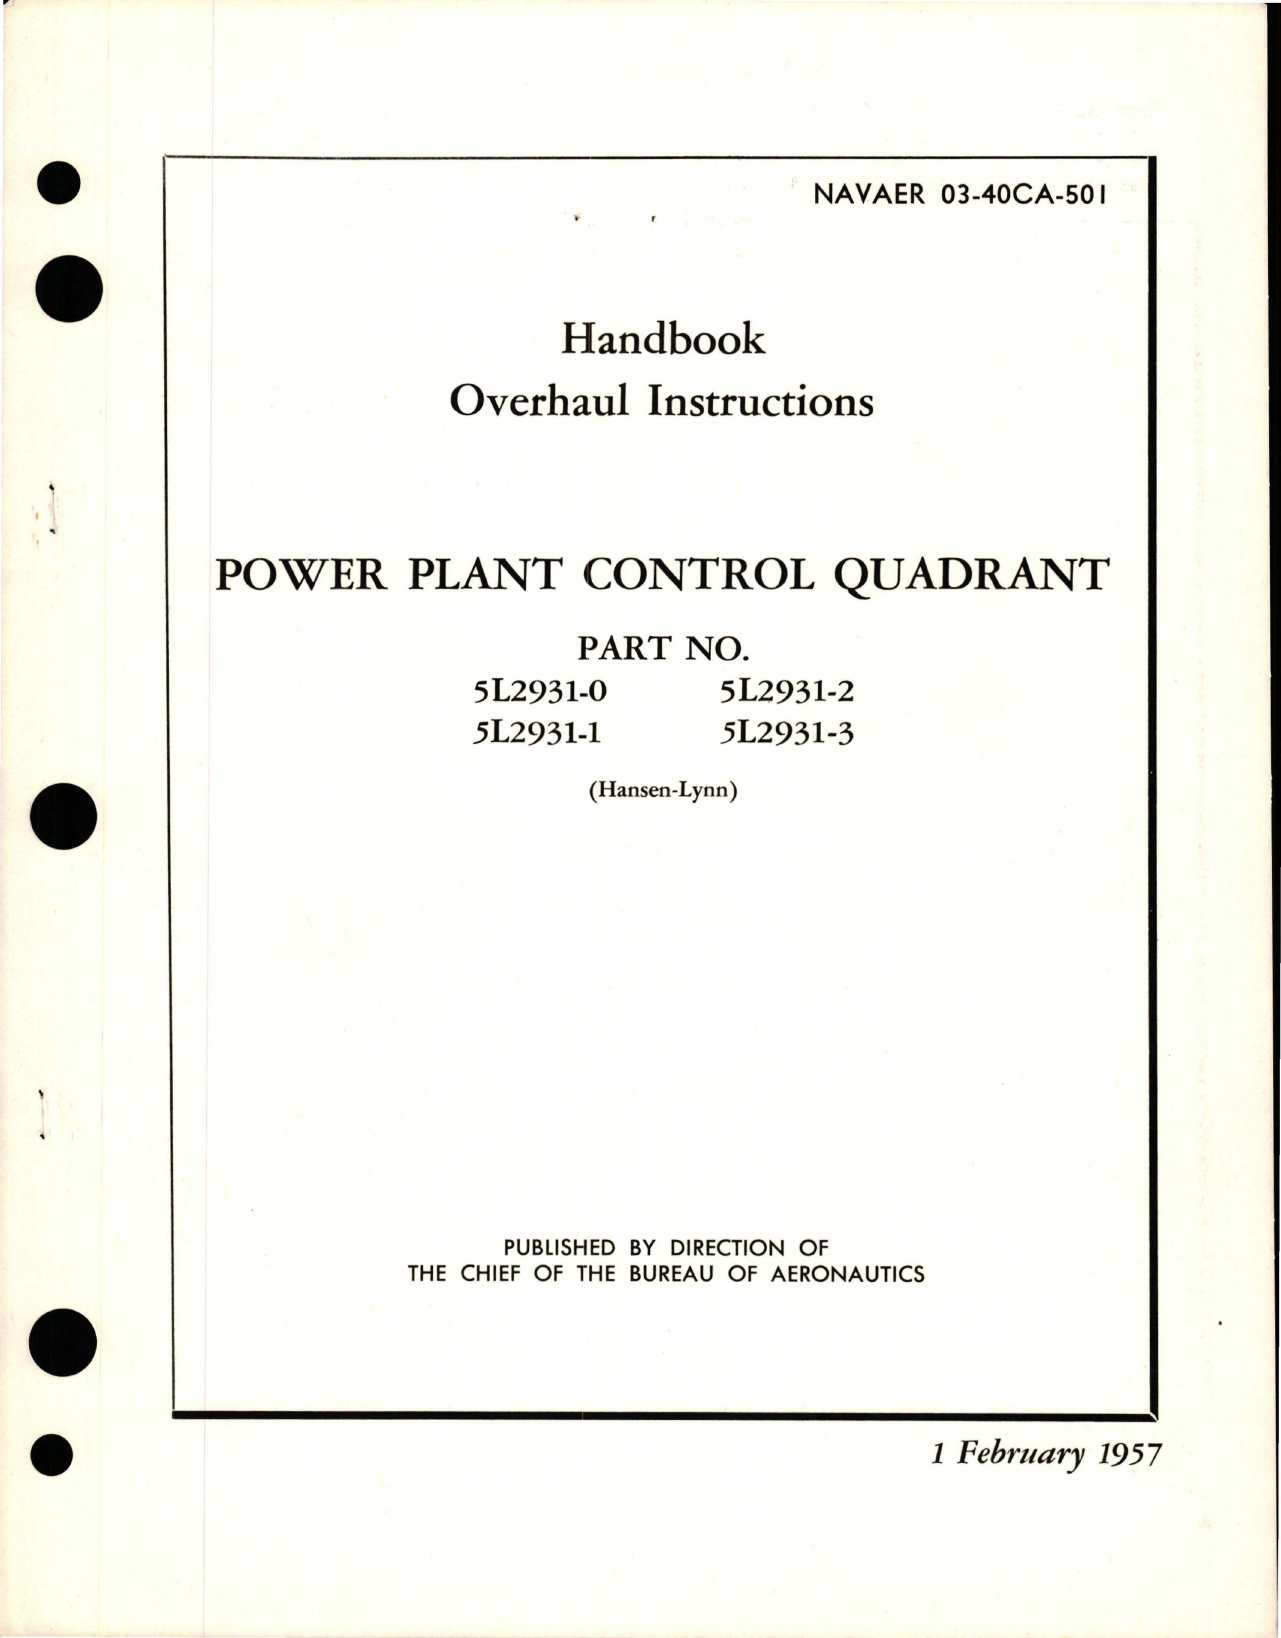 Sample page 1 from AirCorps Library document: Overhaul Instructions for Power Plant Control Quadrant - Parts 5L2931-0, 5L2931-1, 5L2931-2, and 5L2931-3 